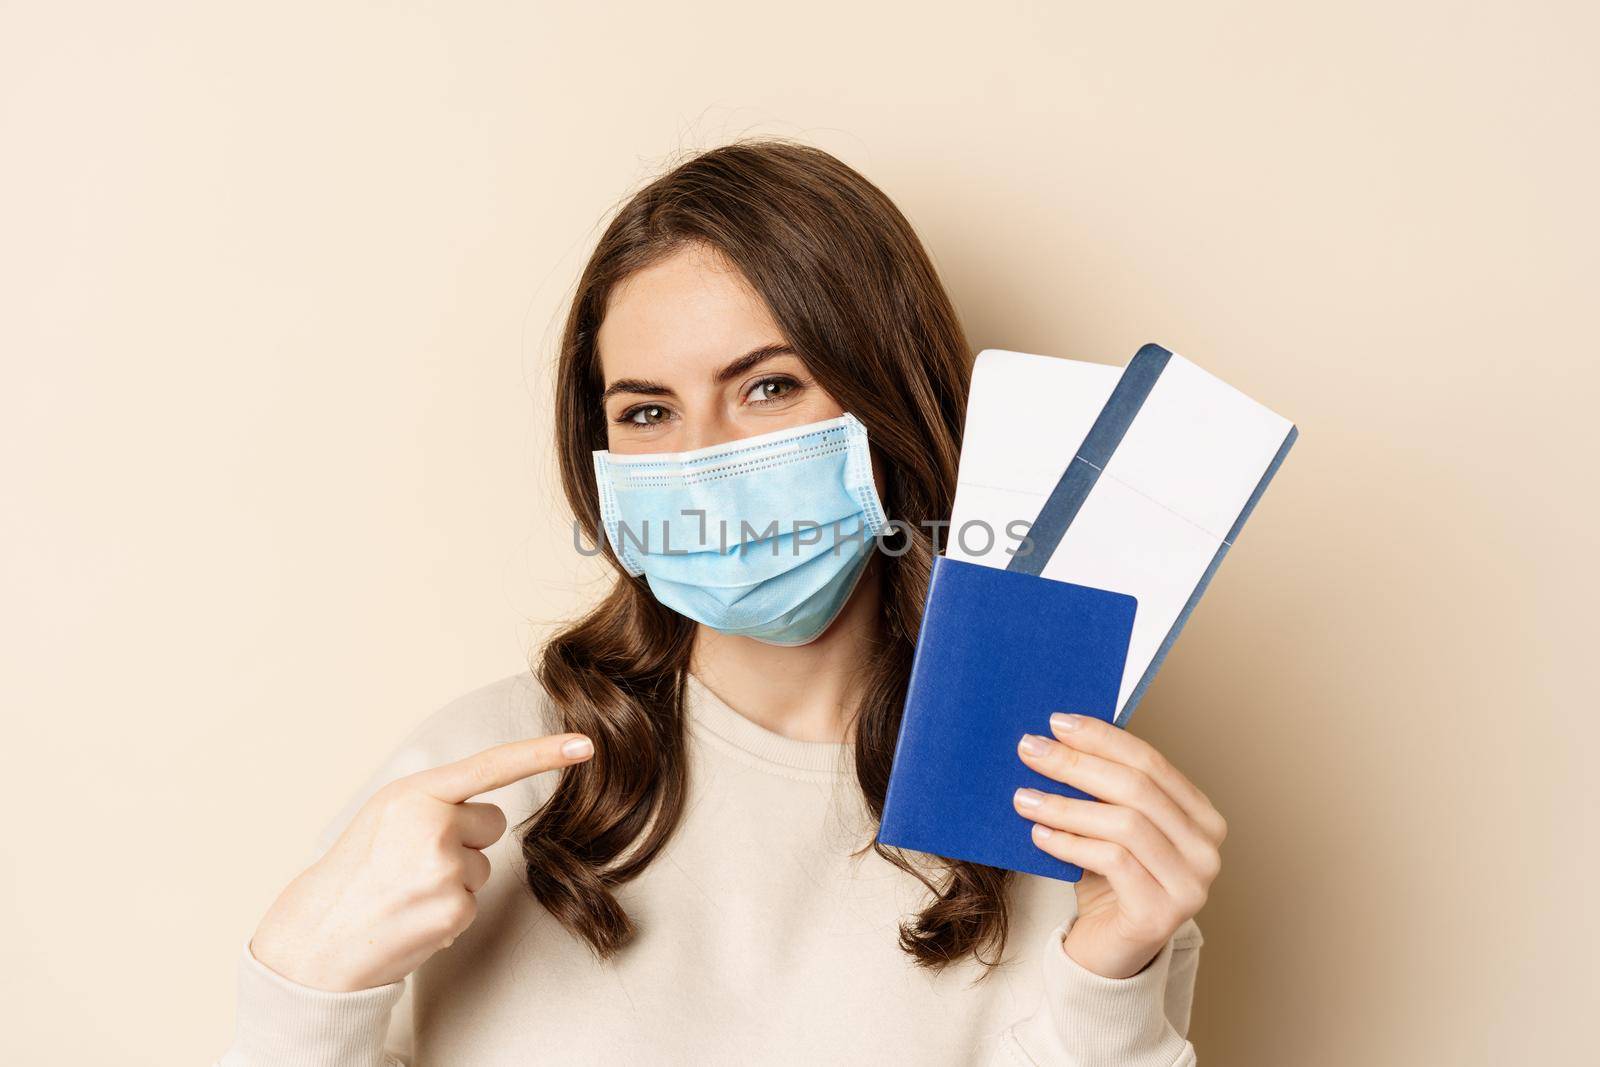 Travel and covid-19 pandemic. Girl in medical face mask travelling, showing passport with two tickets on plane, standing against beige background.